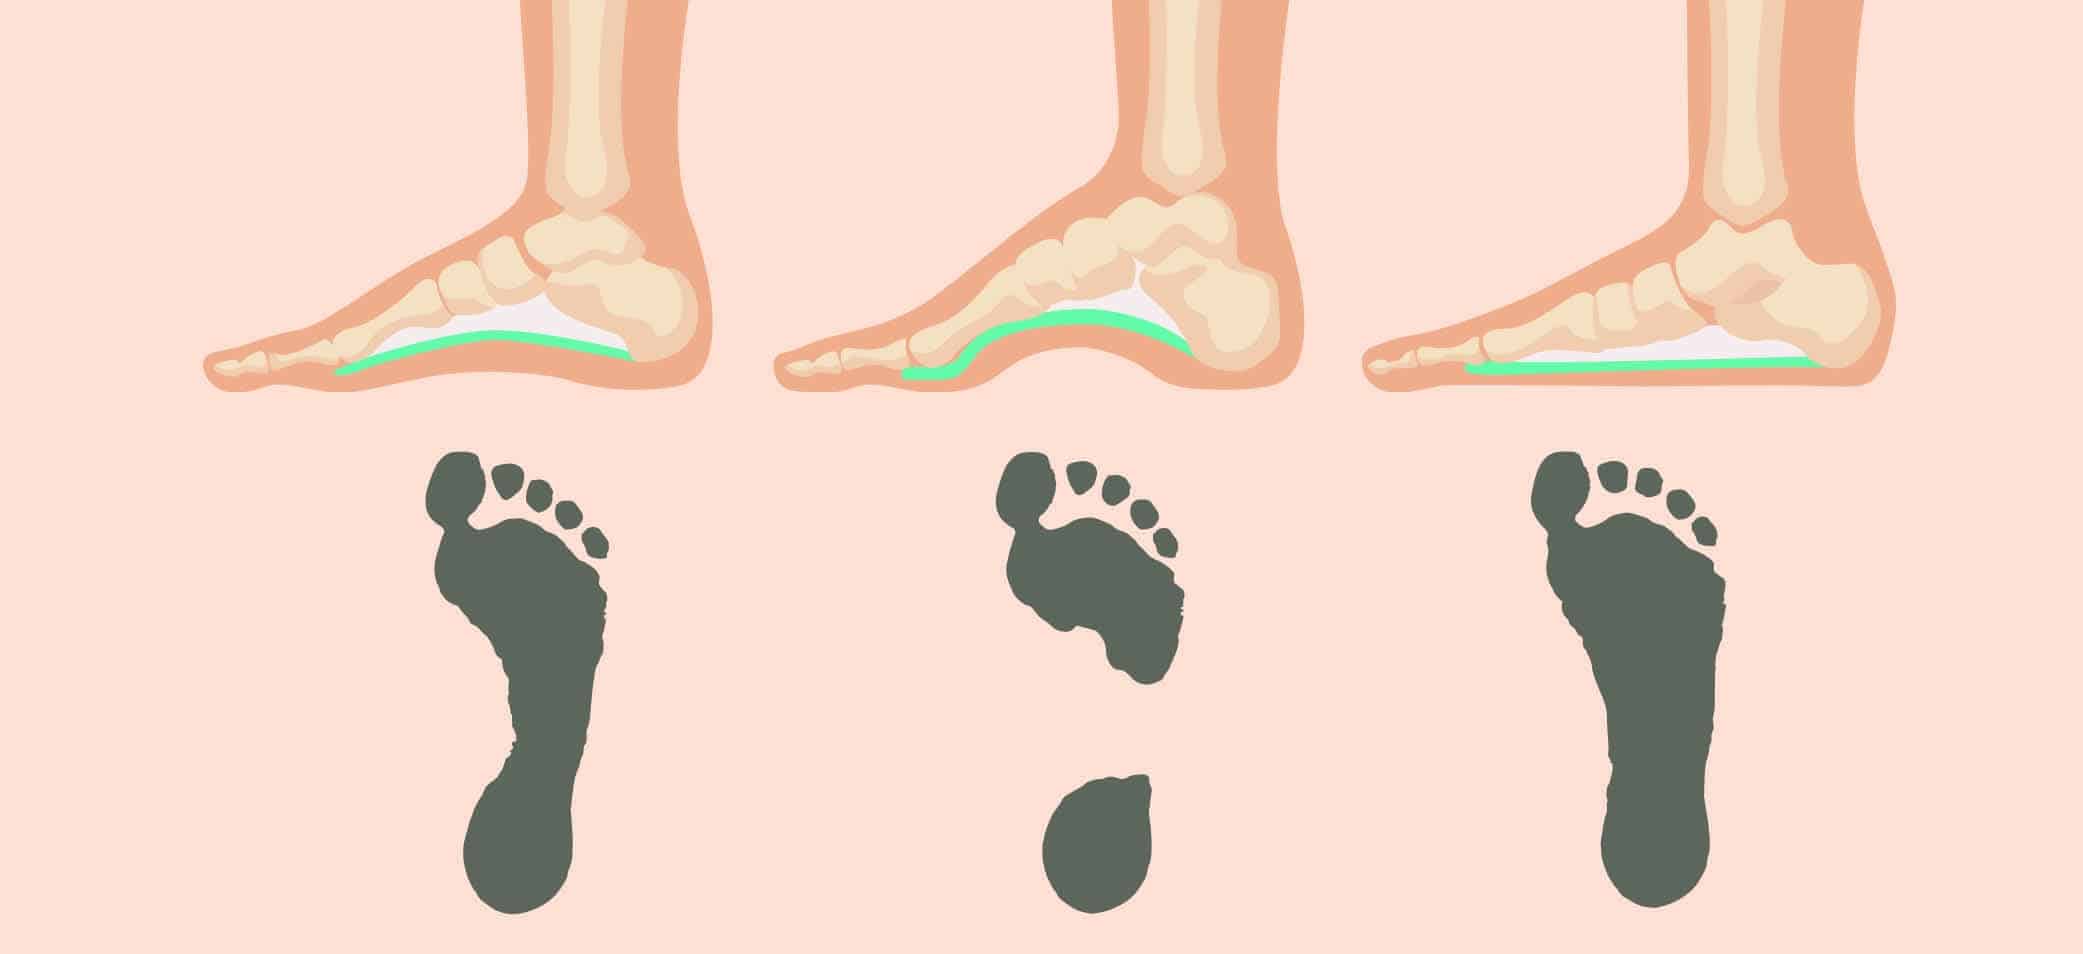 types of foot arches